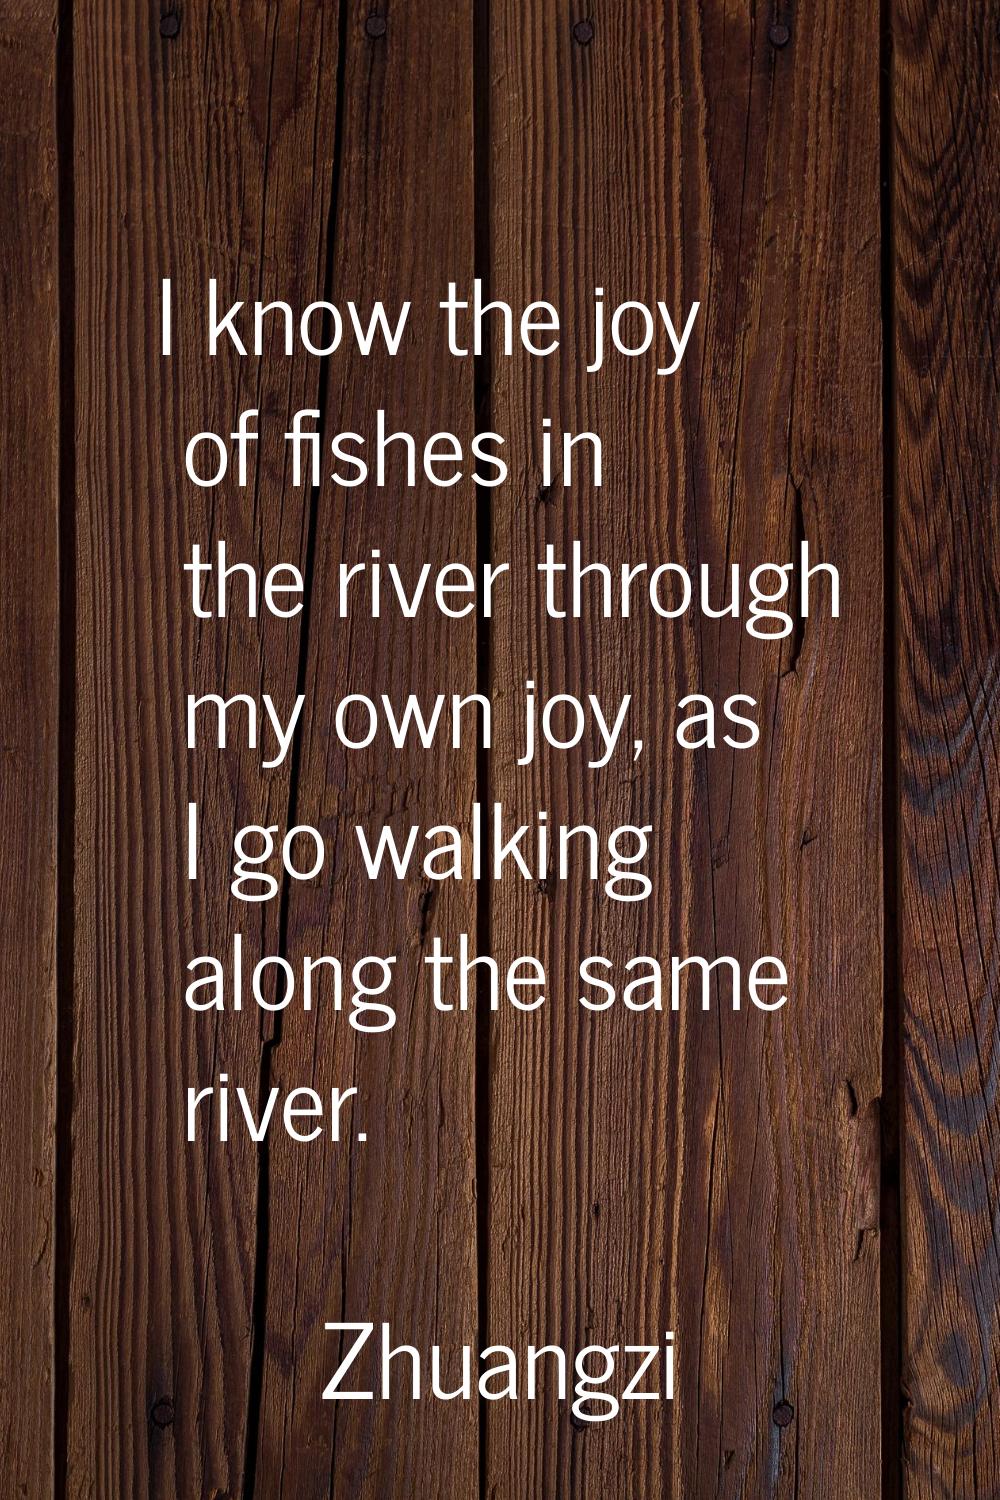 I know the joy of fishes in the river through my own joy, as I go walking along the same river.